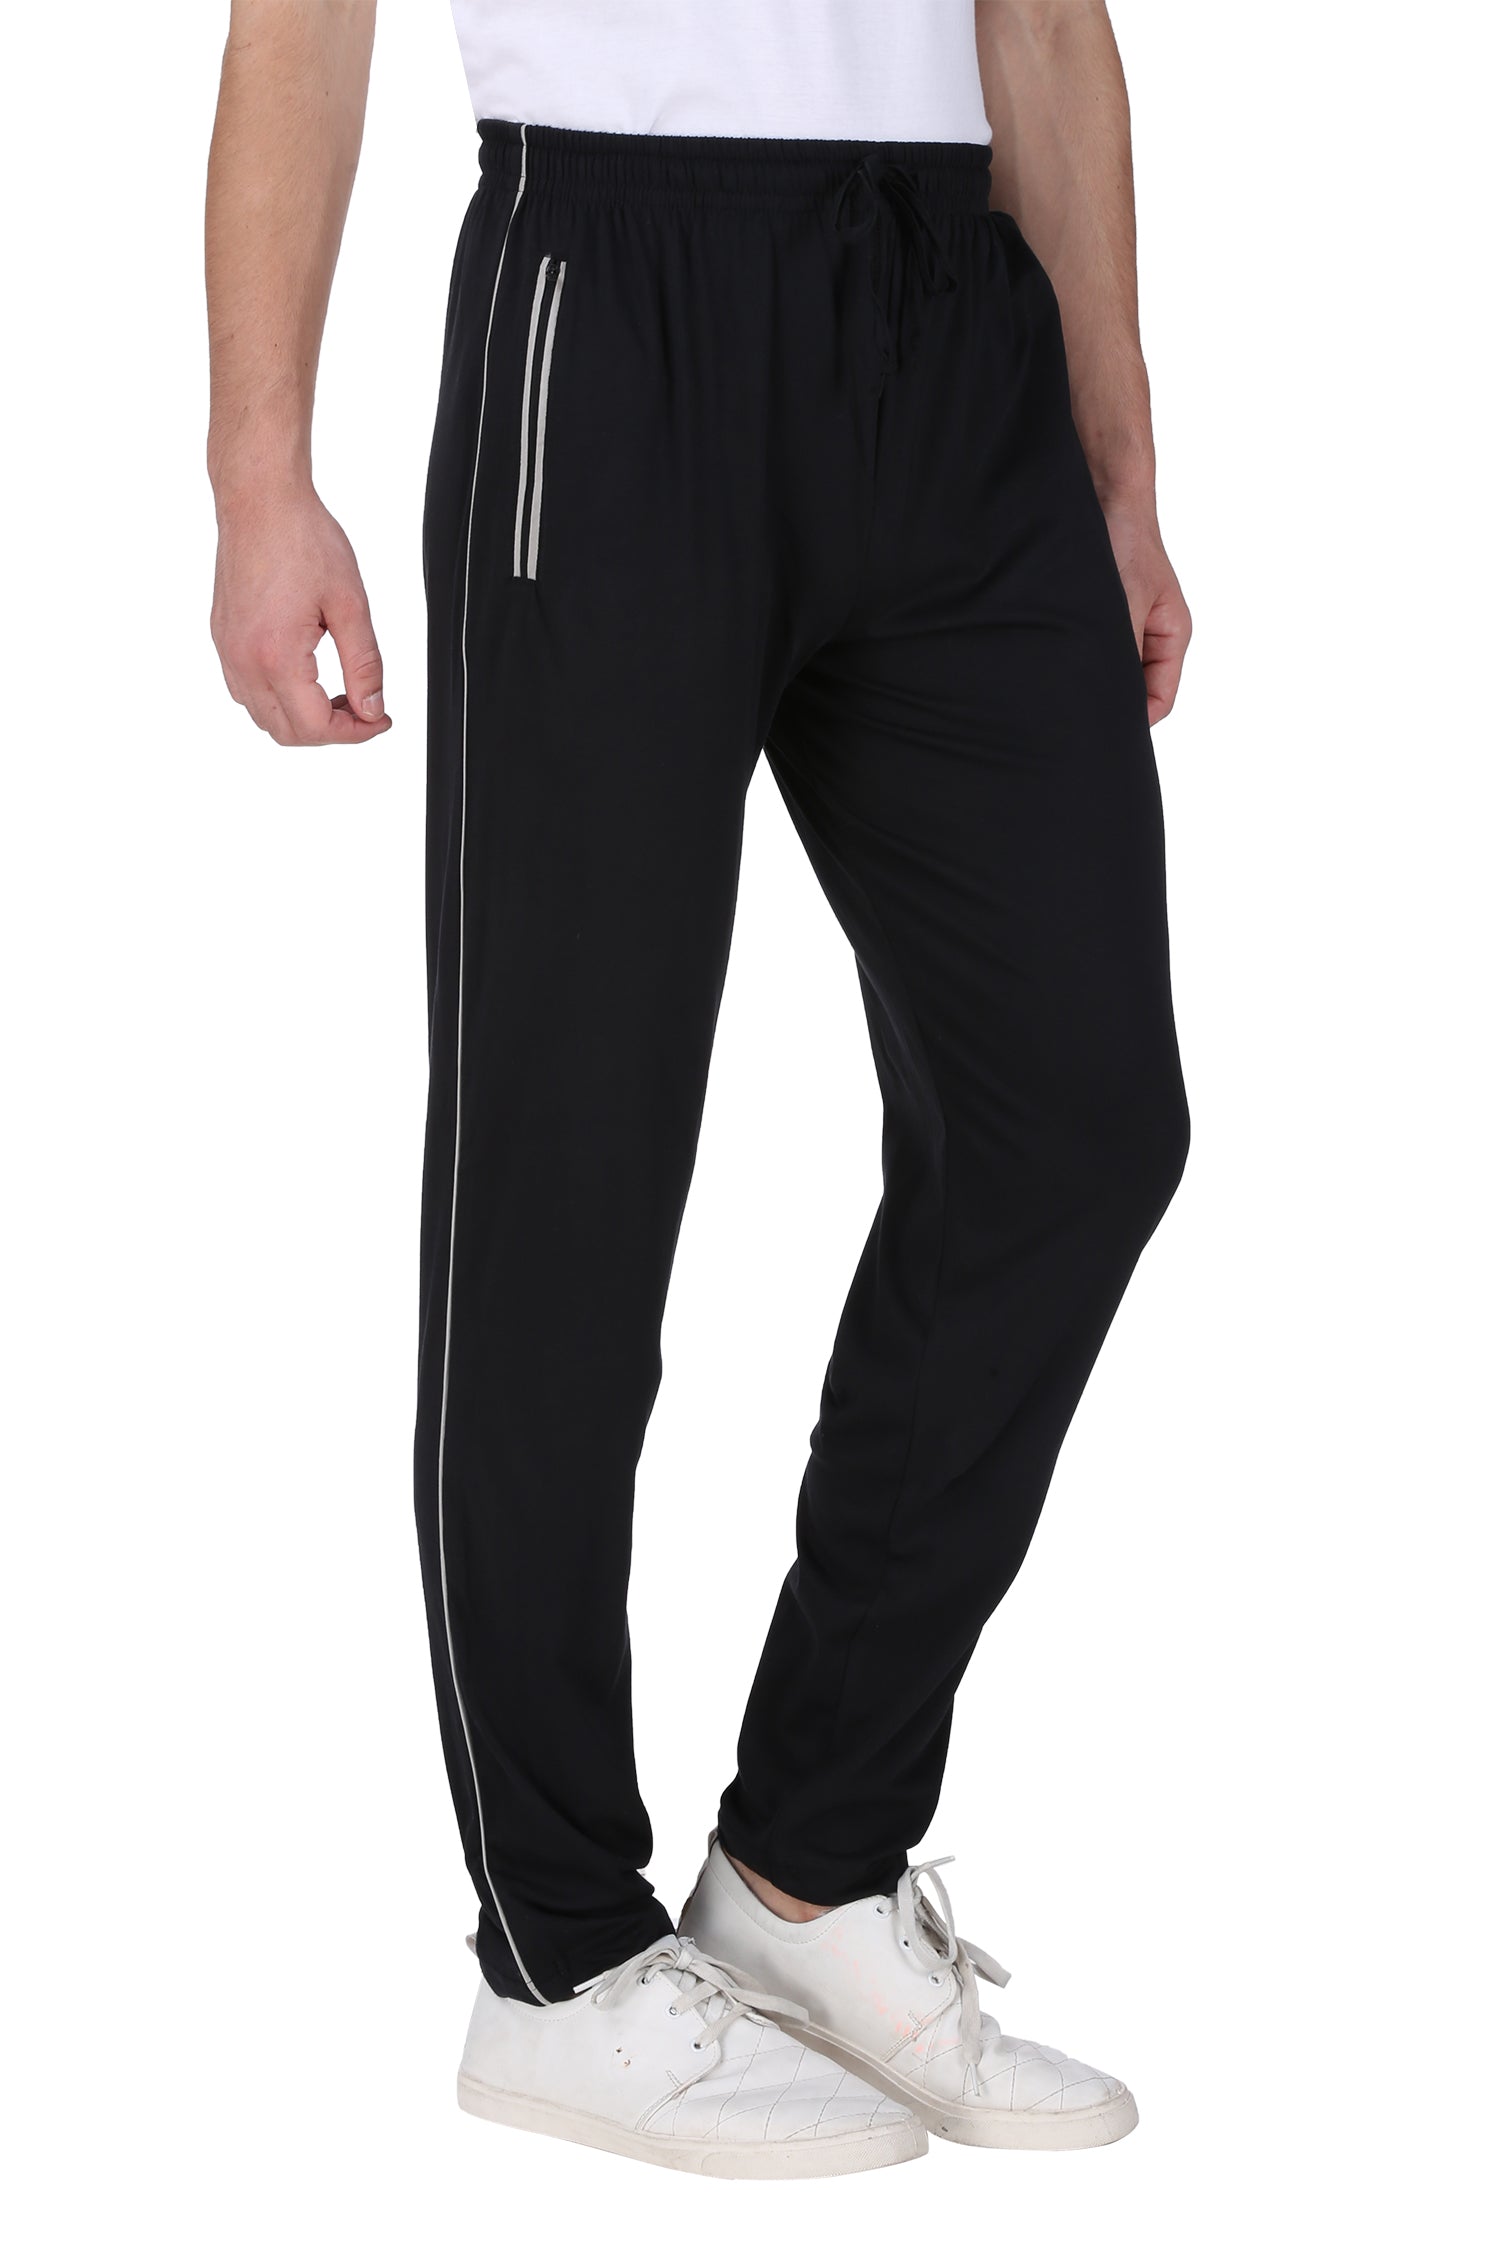 Delhi Seven Track pants pack of 2 Rs.337, Fort Collins pack of 2 Rs.412